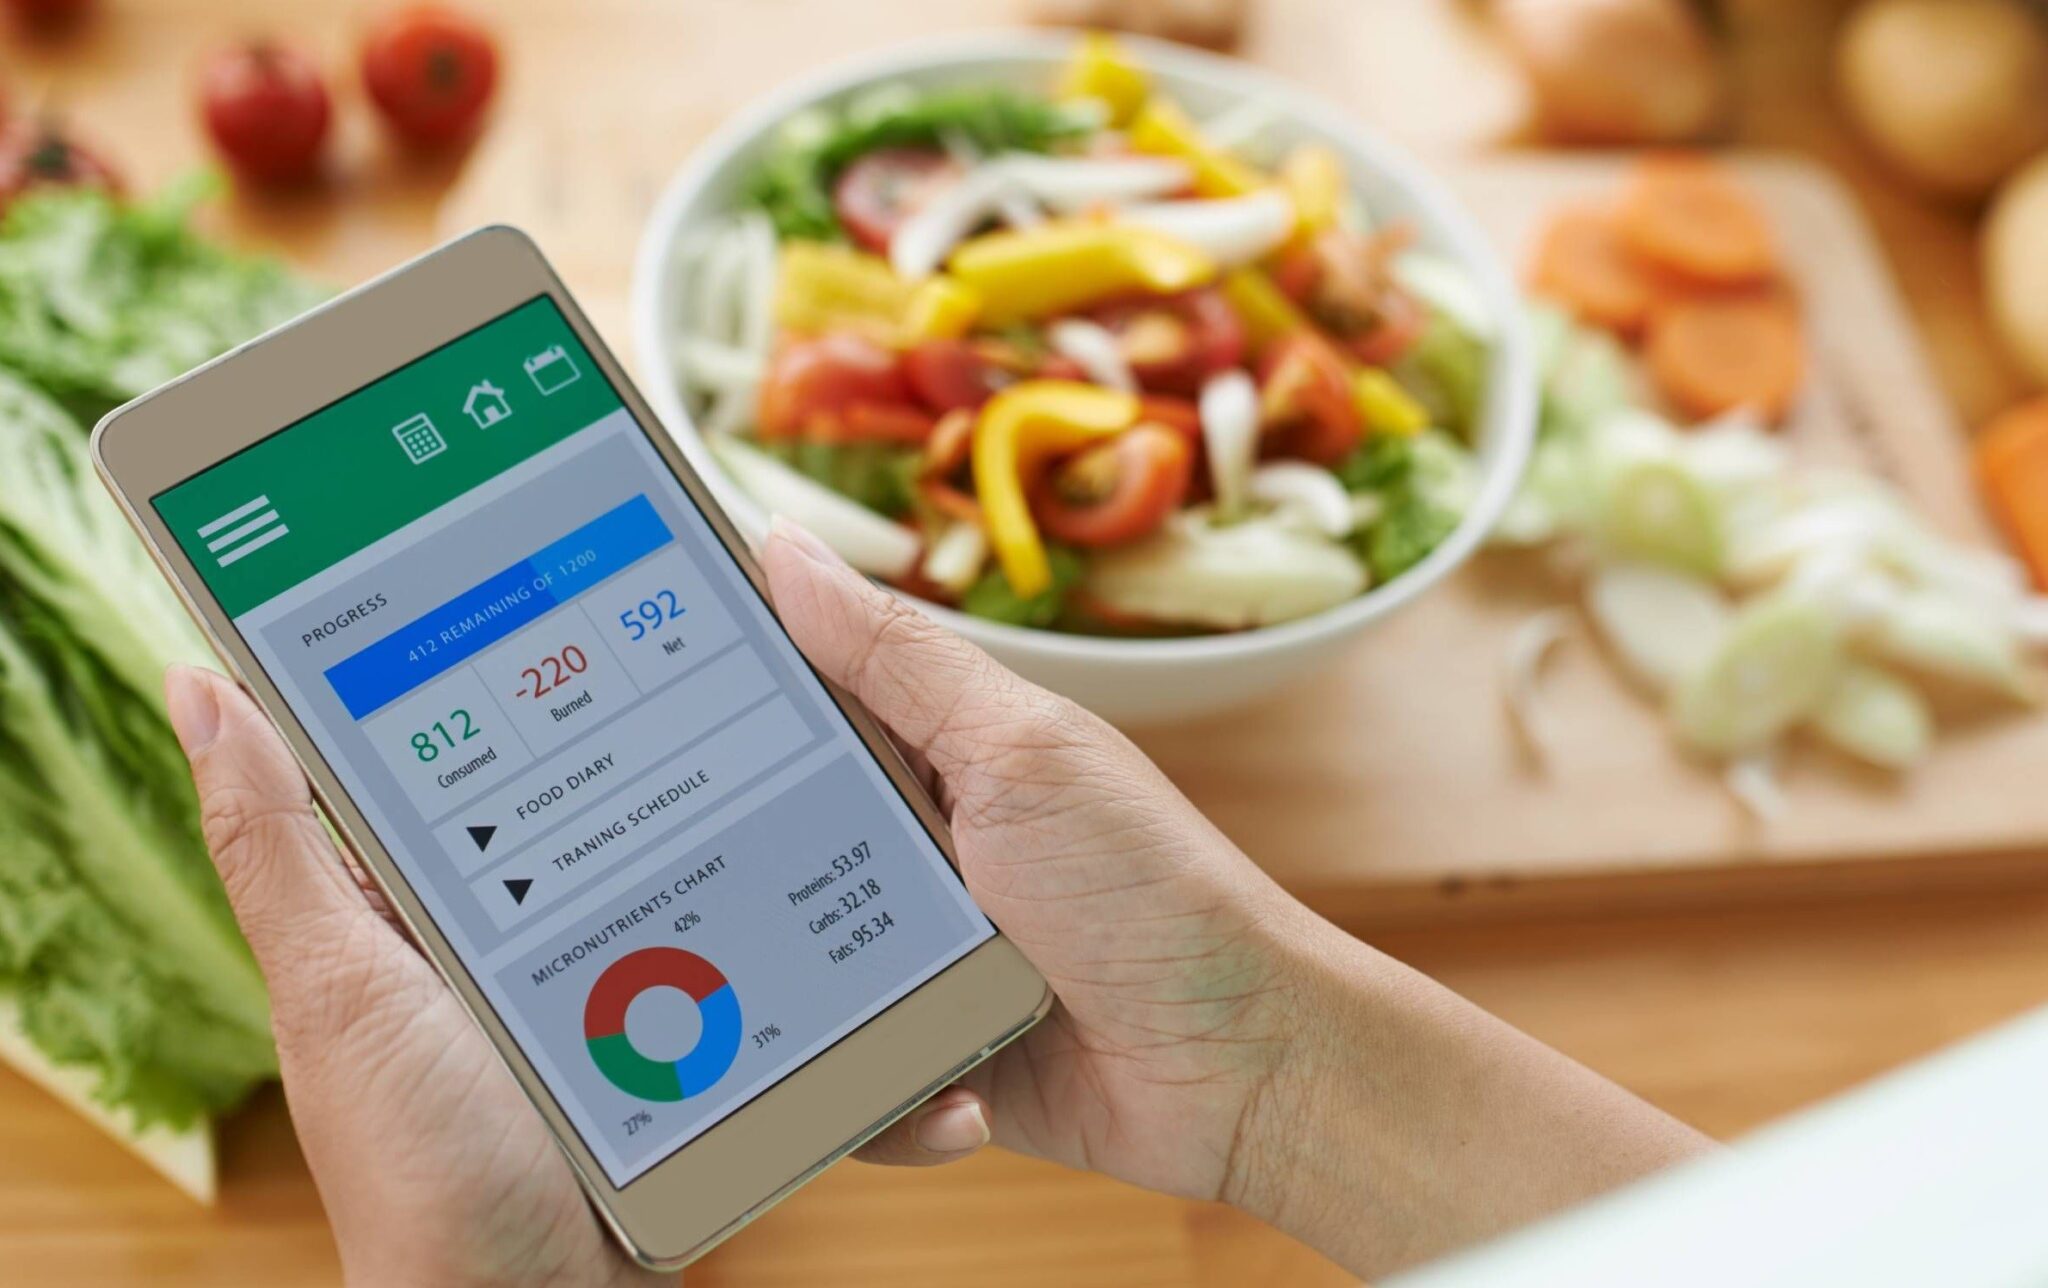 What features make the Diet & Nutrition mobile app stand apart?